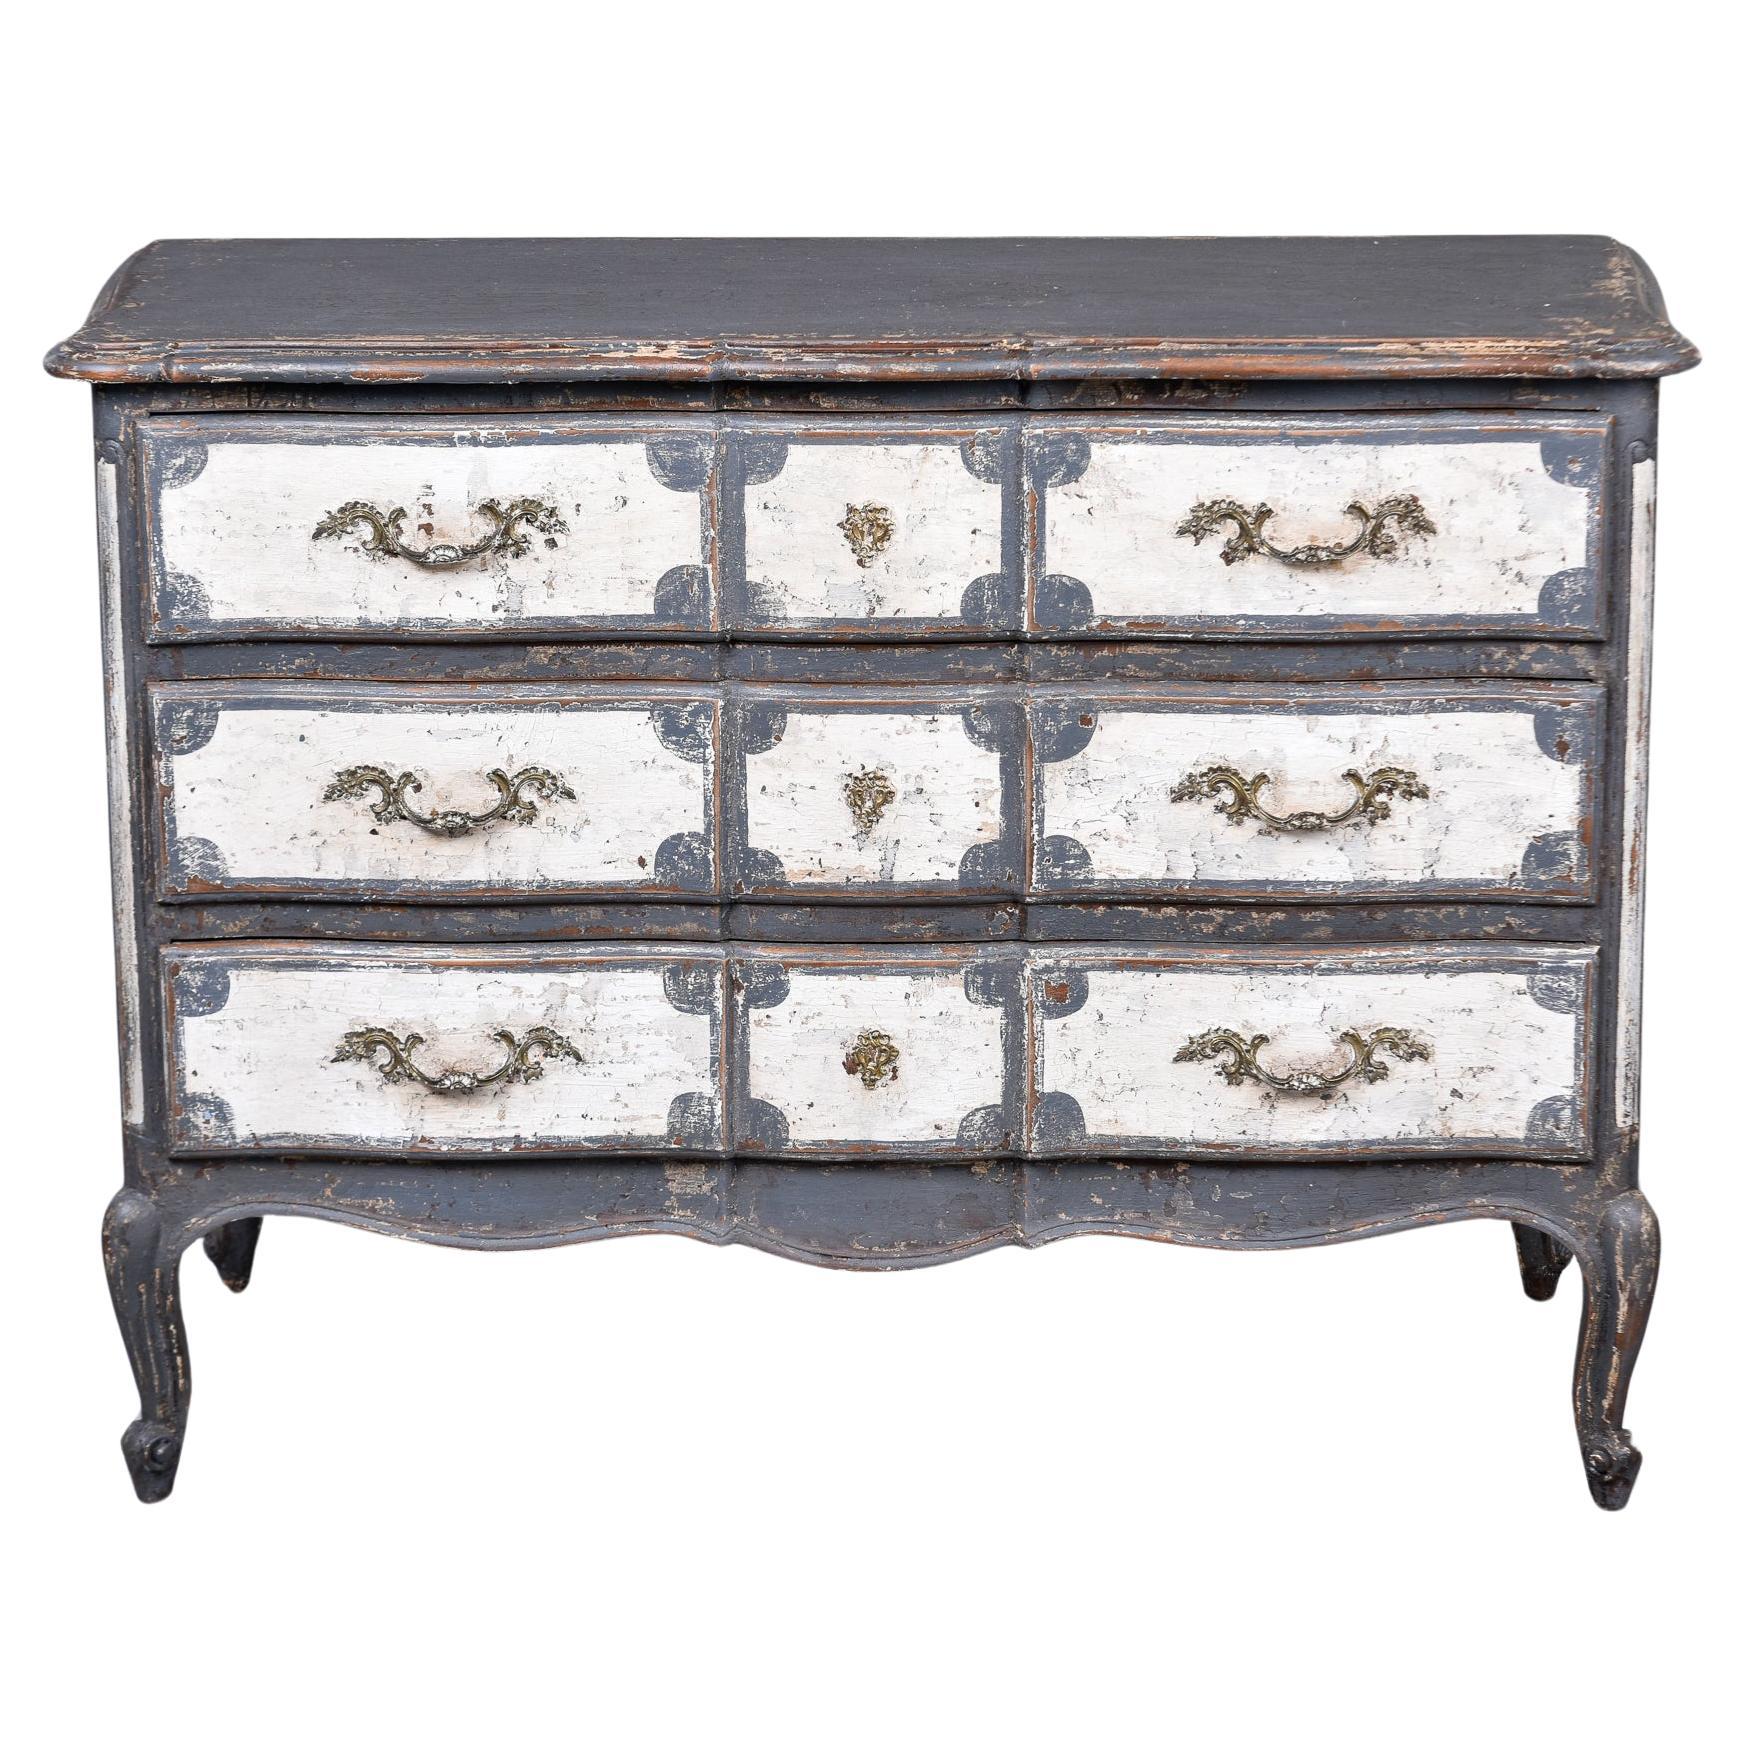 Early 20th C Painted French Three Drawer Chest